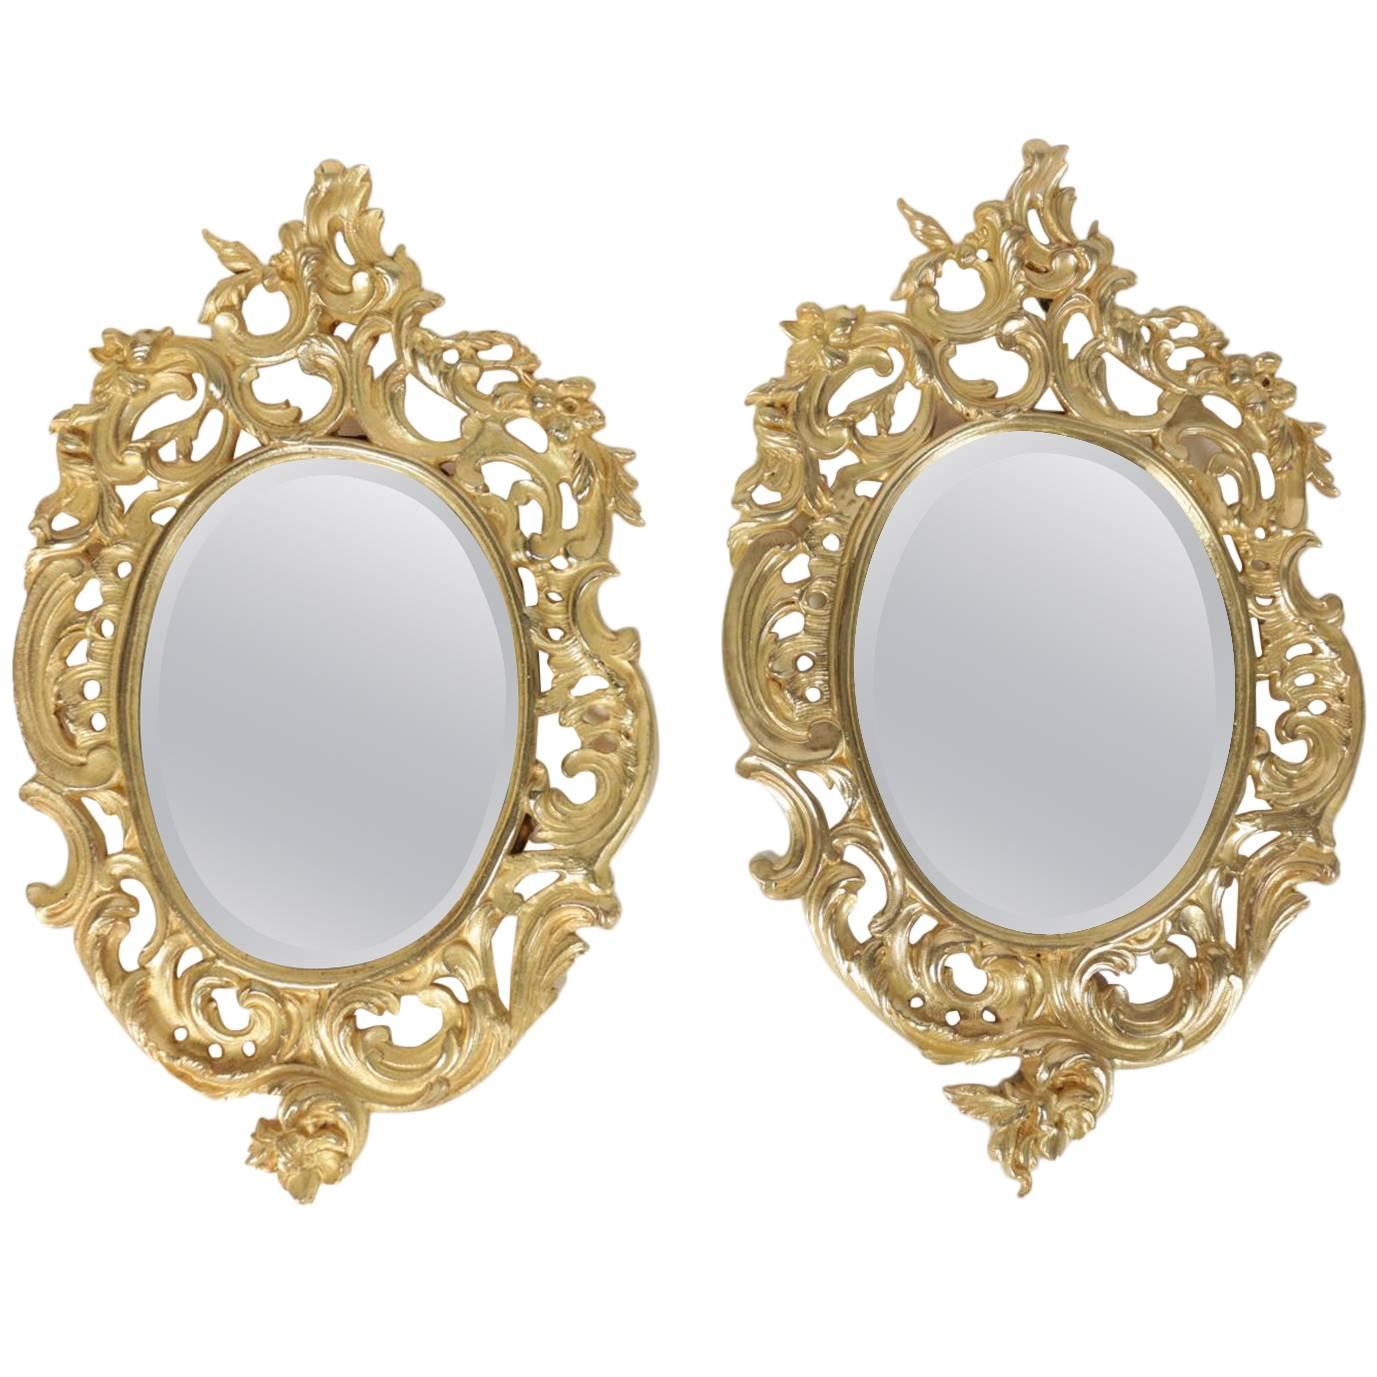 Pair of Gold Gilt Bronze Mirrors from the 19th Century